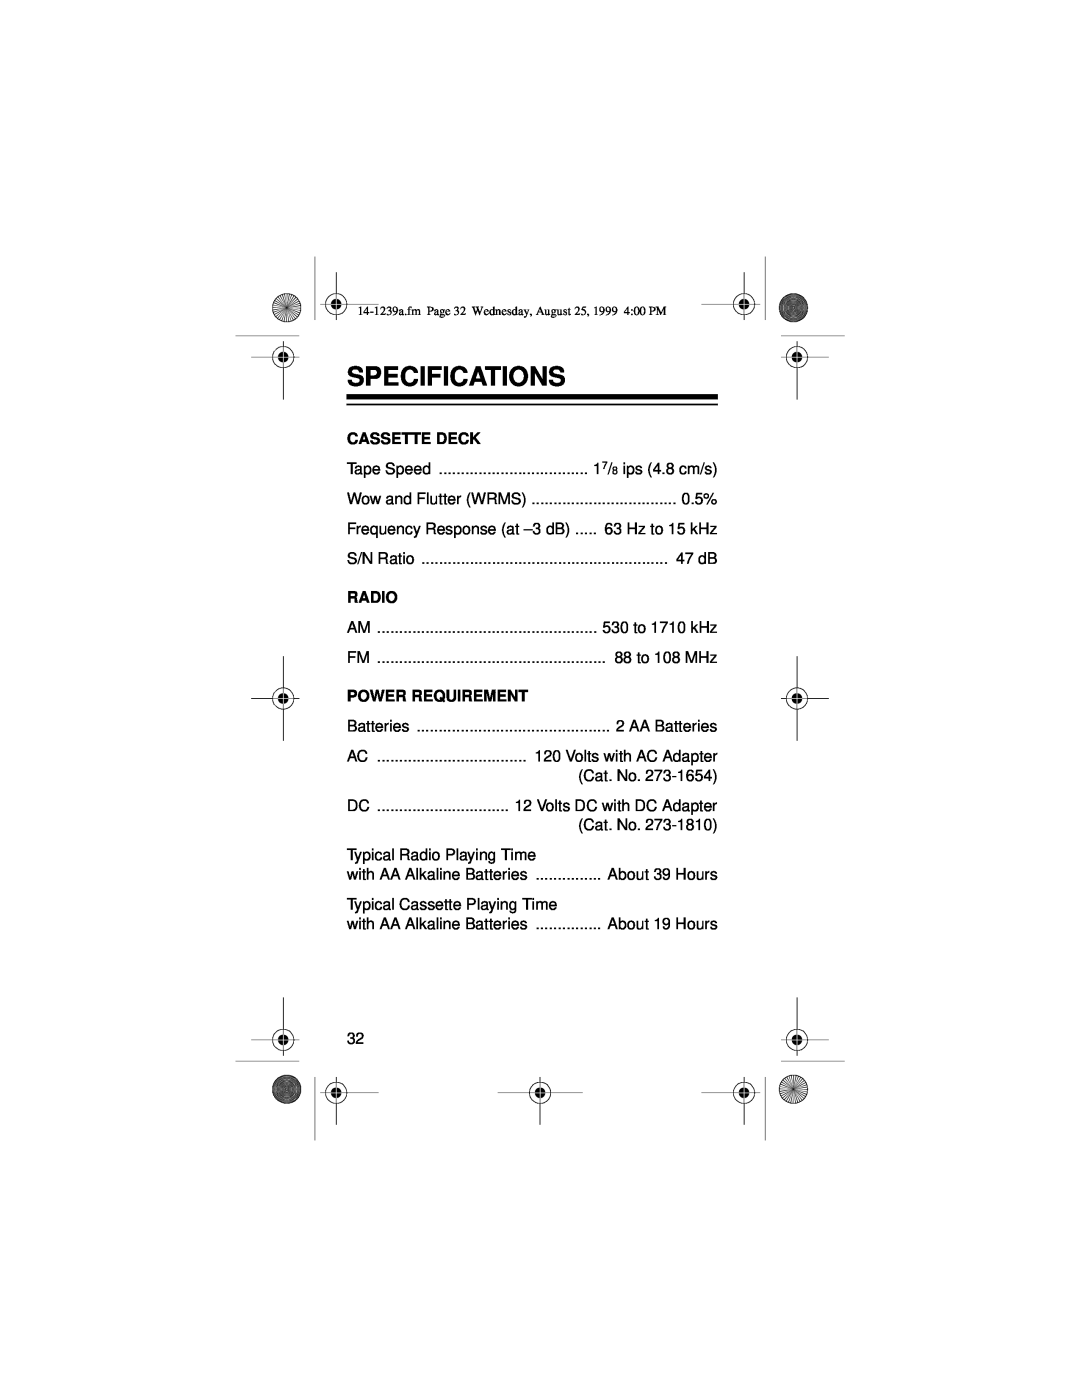 Optimus SCR-96 owner manual Specifications, Cassette Deck, Radio, Power Requirement 